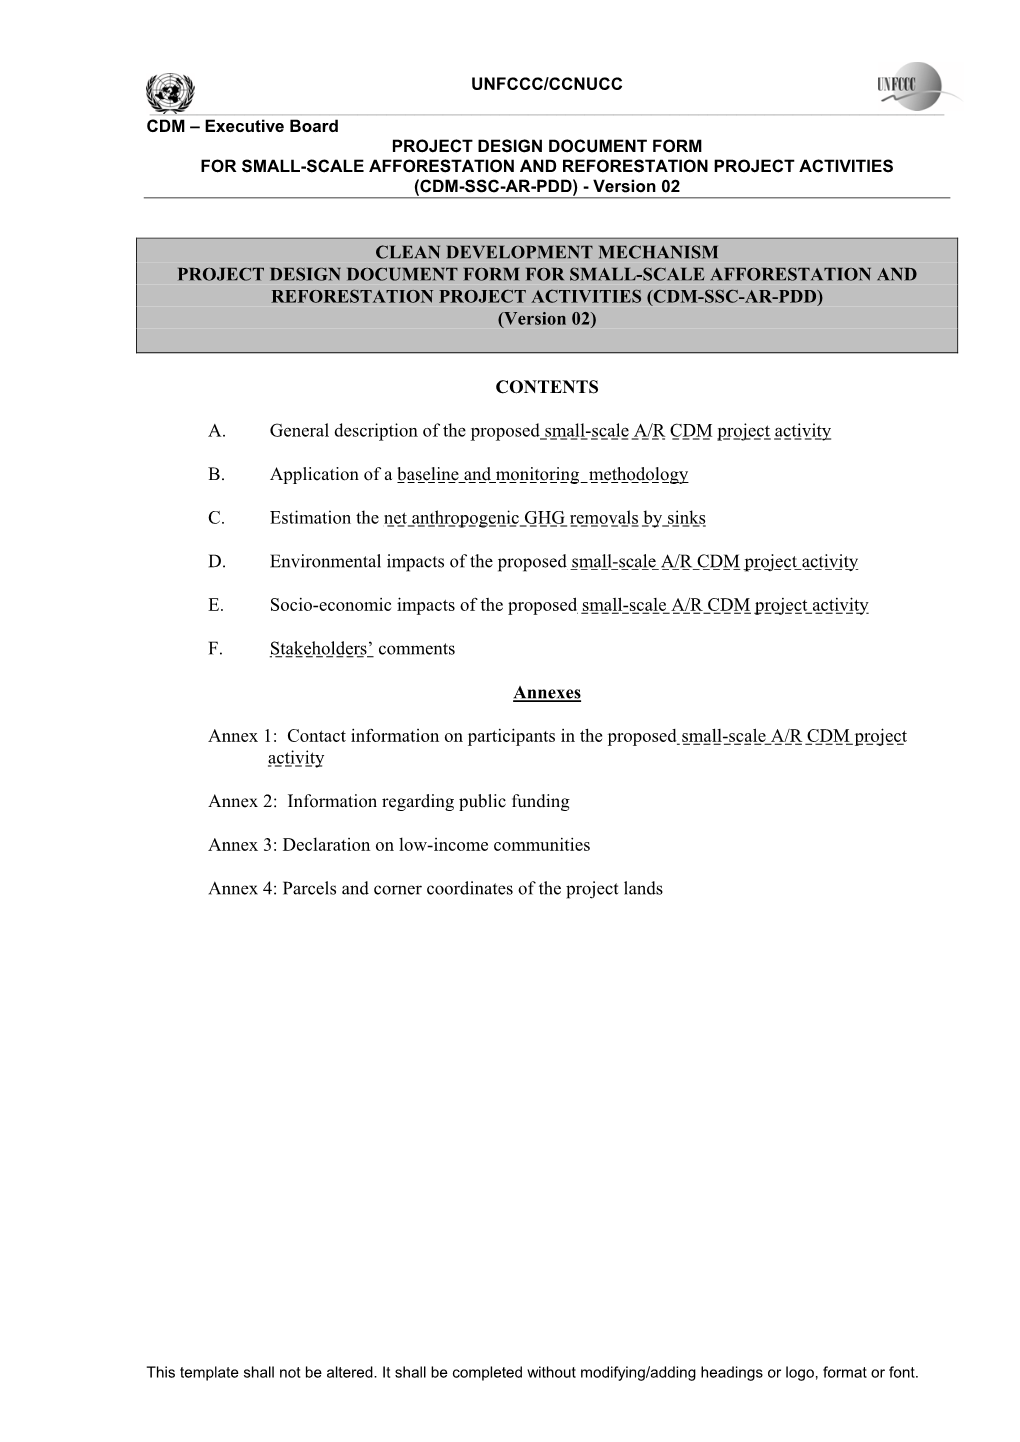 CLEAN DEVELOPMENT MECHANISM PROJECT DESIGN DOCUMENT FORM for SMALL-SCALE AFFORESTATION and REFORESTATION PROJECT ACTIVITIES (CDM-SSC-AR-PDD) (Version 02)